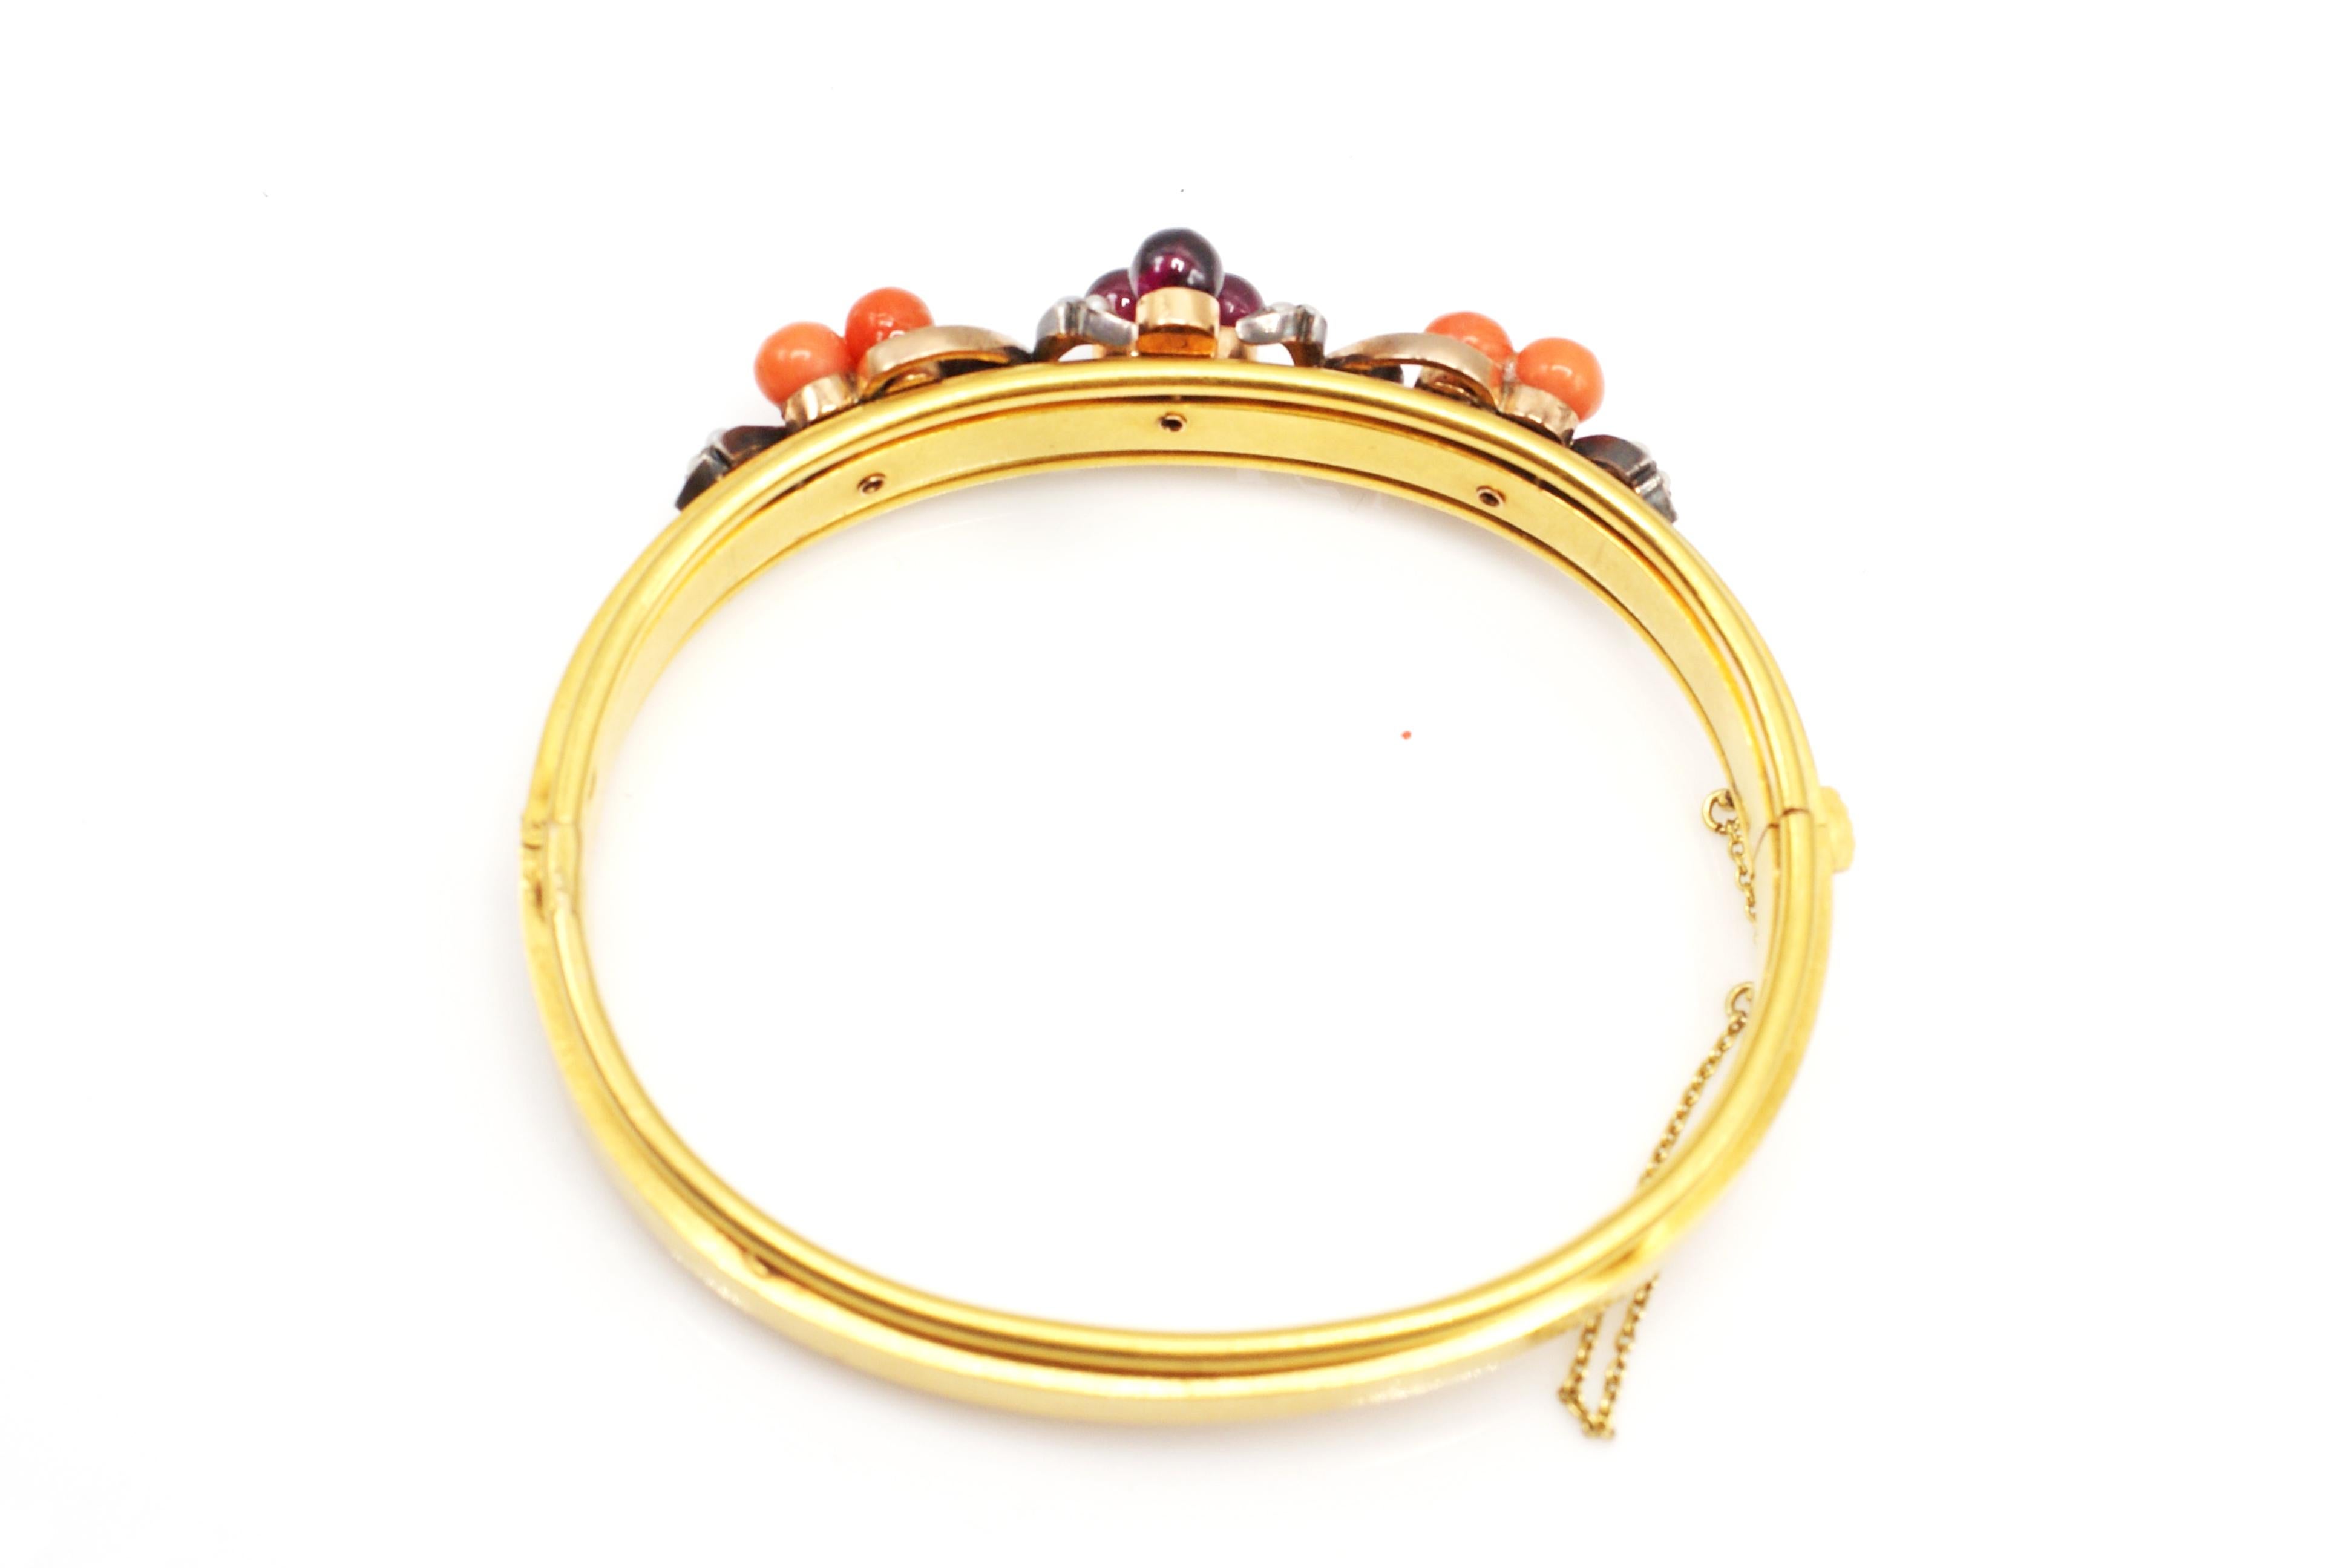 This lovely antique French hinged bangle was masterfully handcrafted in 18 karat yellow gold. 3 round polished burgundy color garnet beads are centrally set with 3 perfectly matched orange-pink coral beads on either side. Set on a gallery of curved